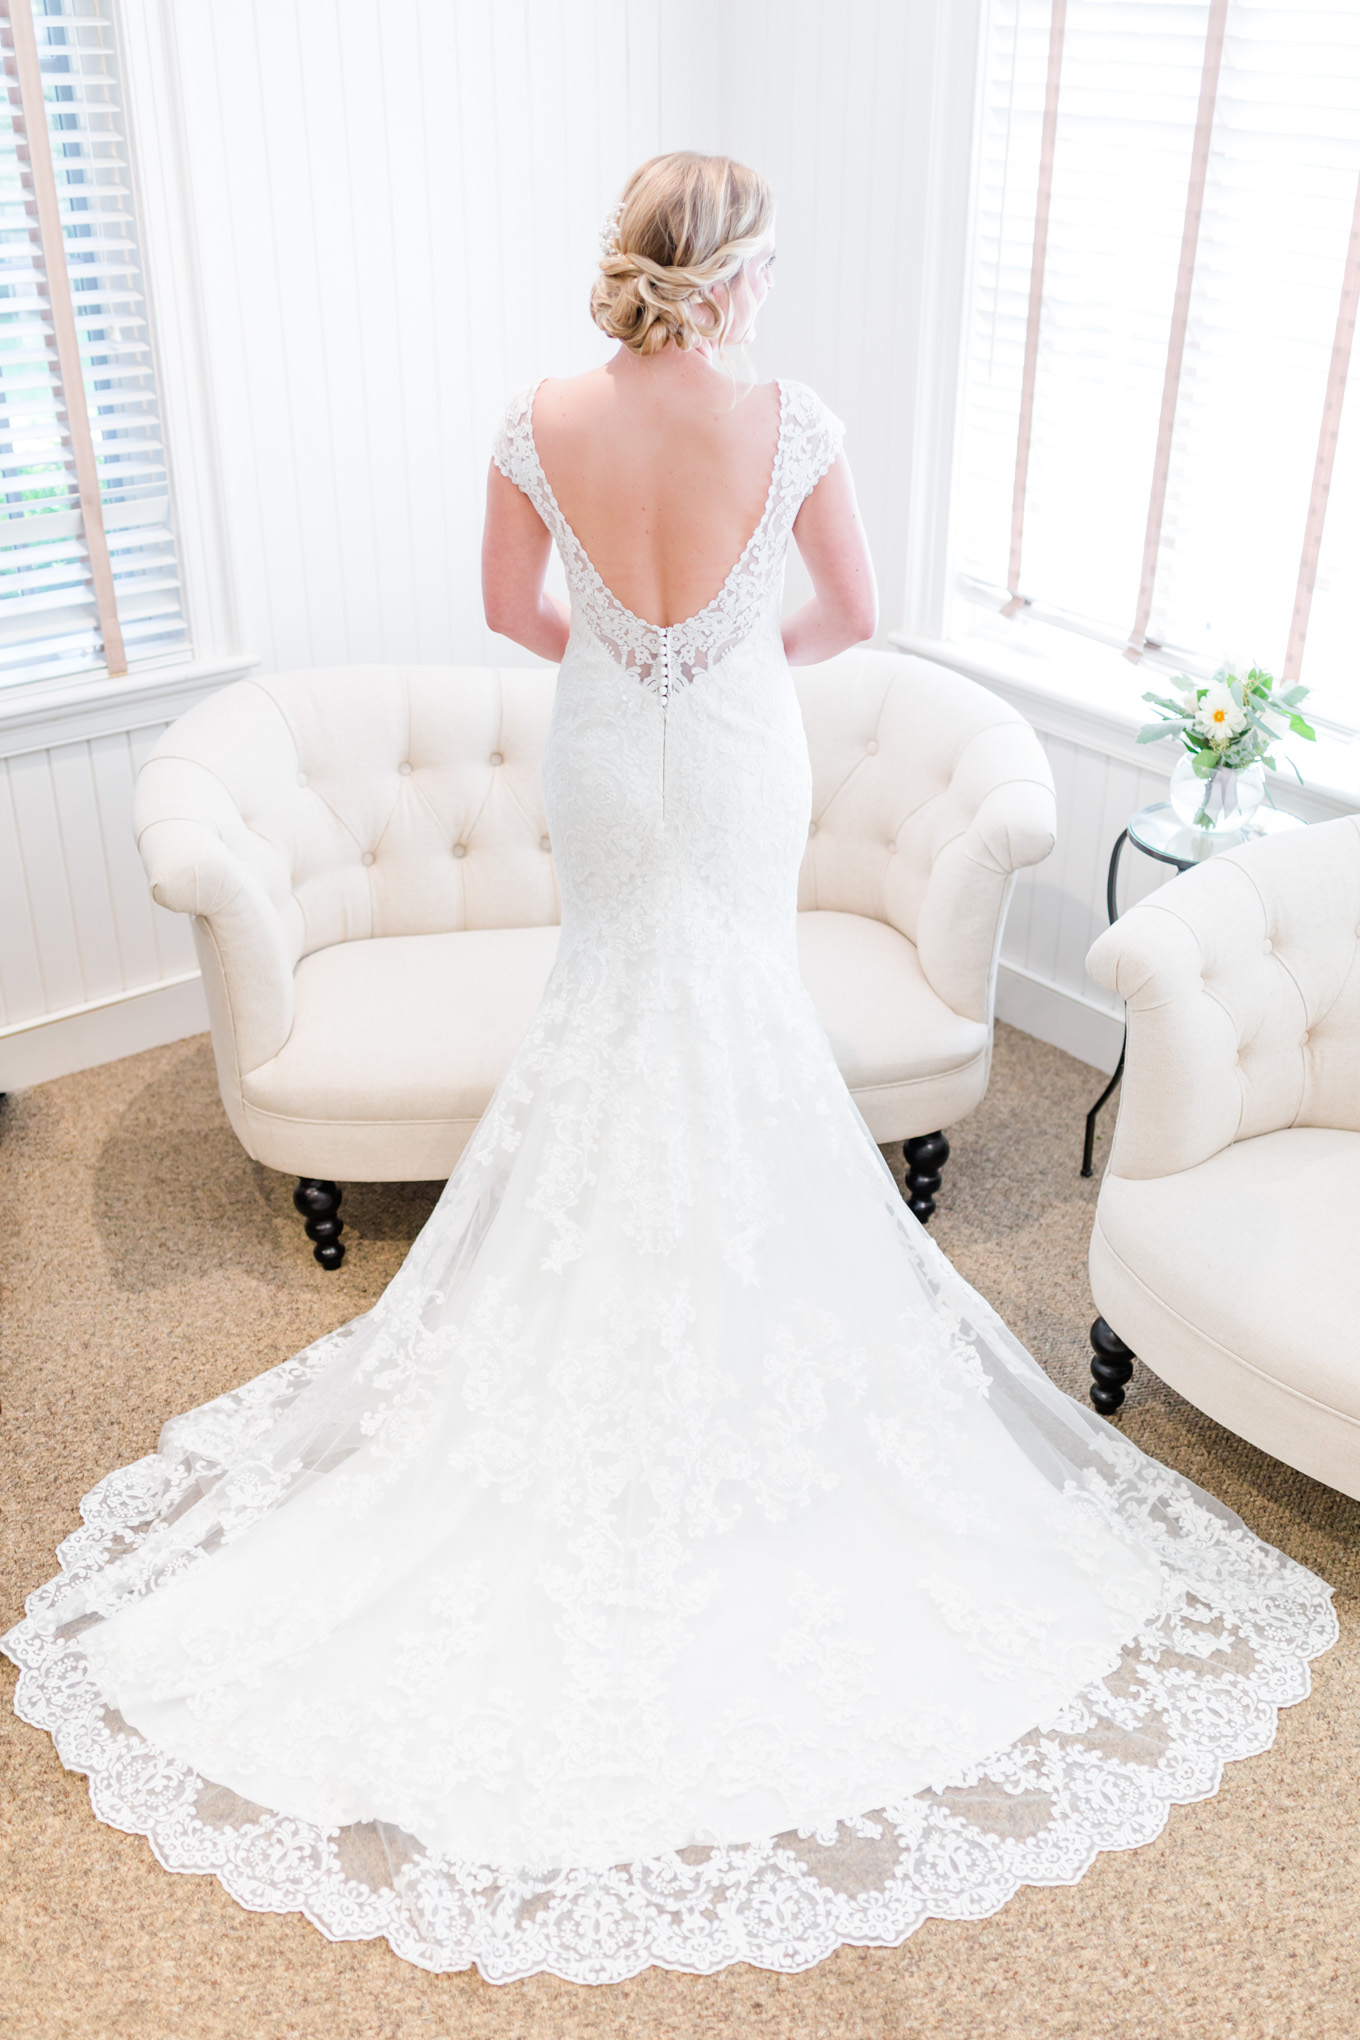 client experience, wedding photography, wedding photography investment, wedding photographer, Virginia wedding photographer, Maryland wedding photographer, behind the scenes, lace wedding gown, blonde bride, Keswick Vineyards wedding